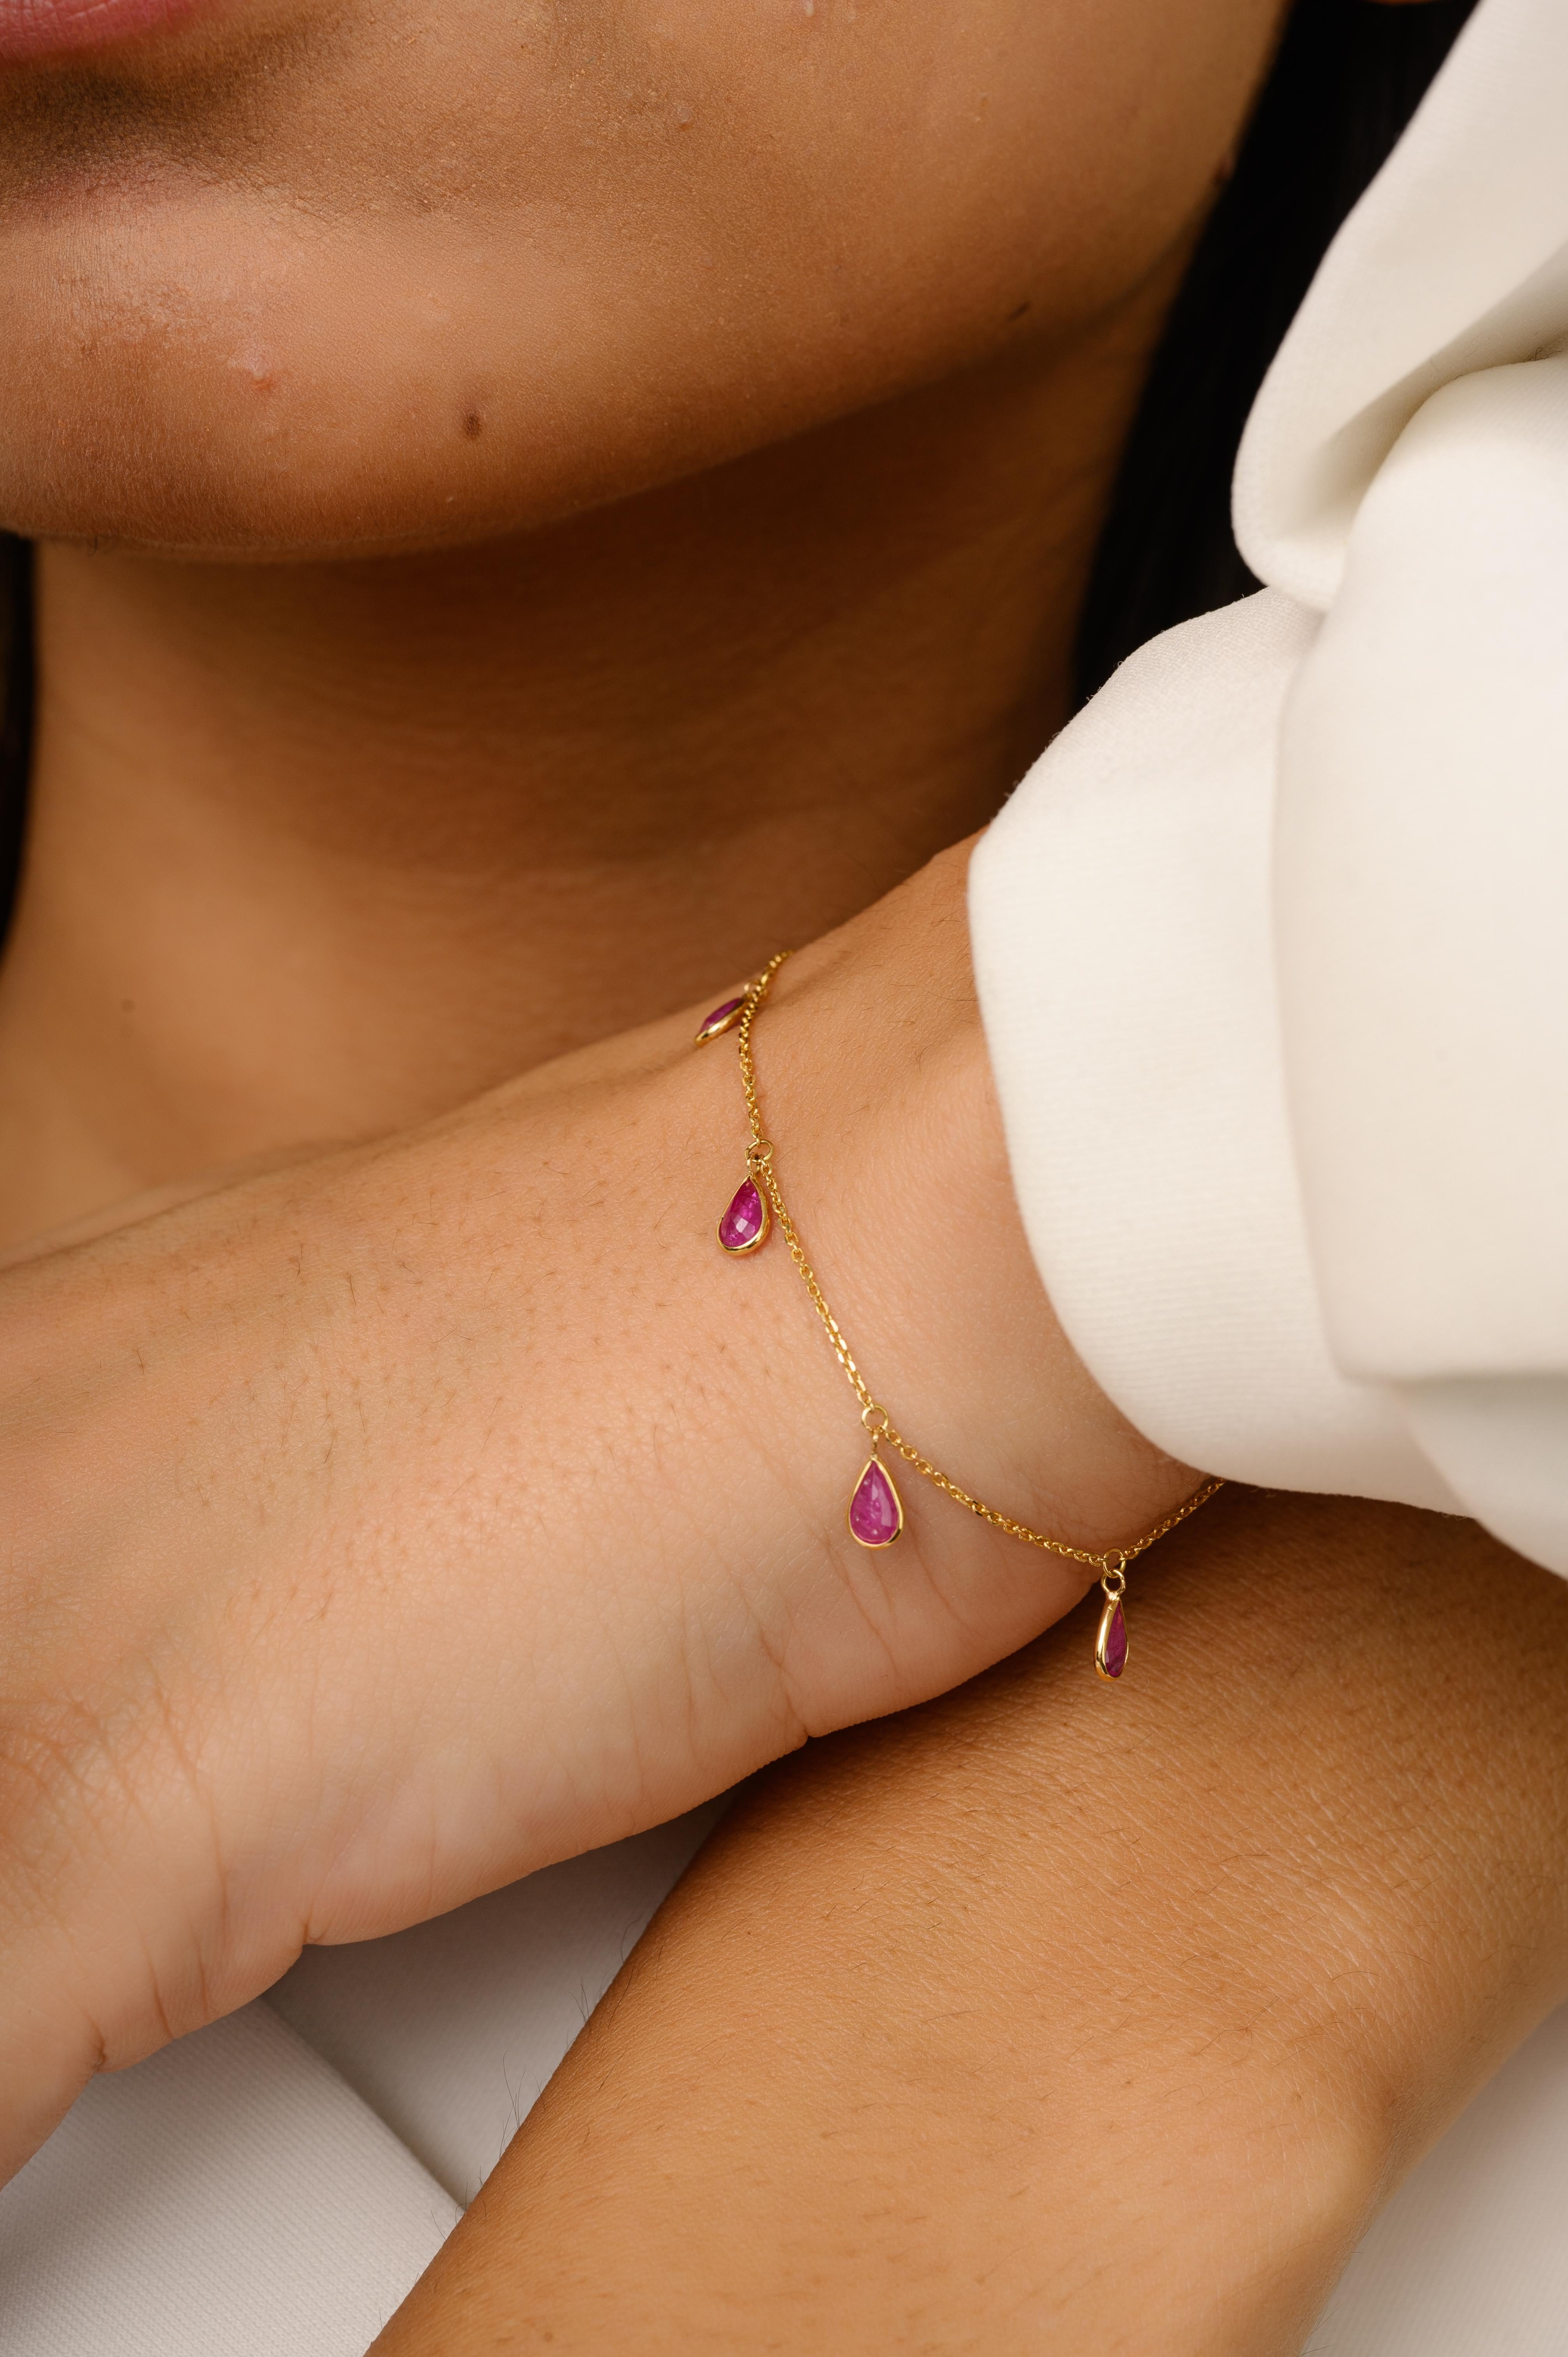 Pear Cut Ruby Everyday Chain Bracelet for Her Handcrafted in 18k Yellow Gold